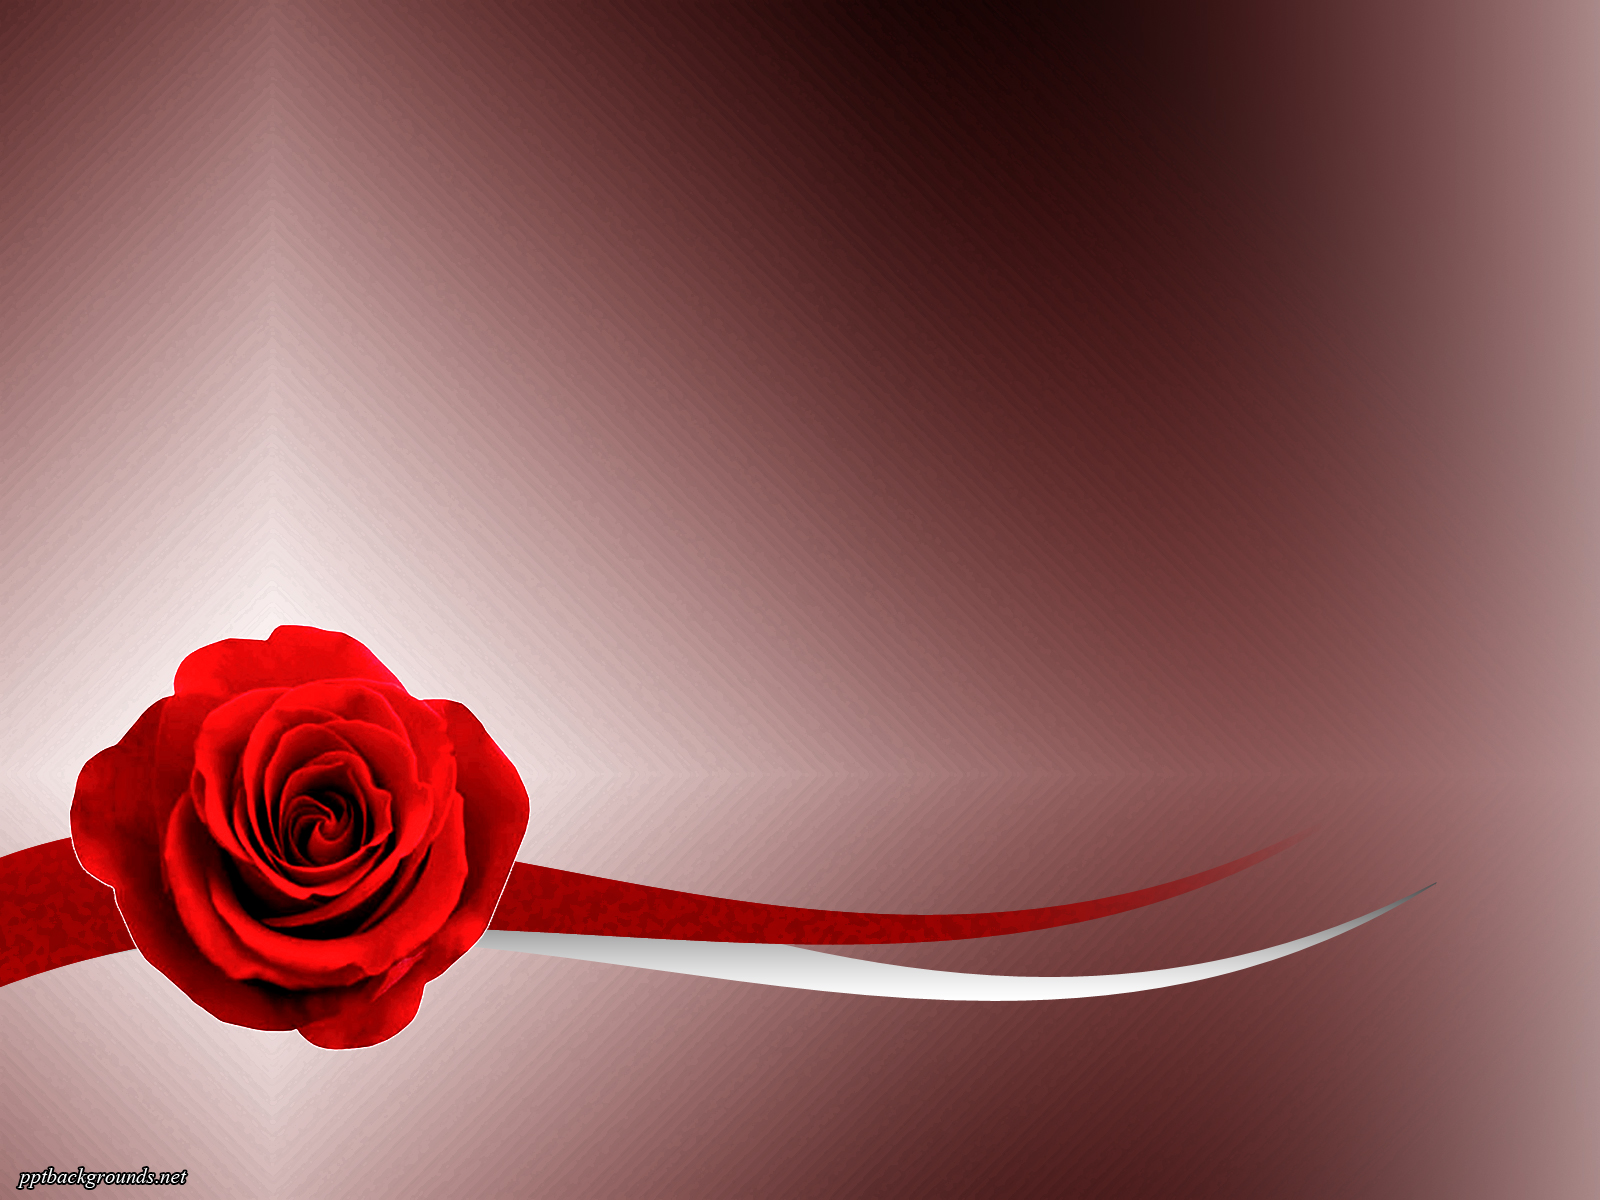 Red Rose On The Abstract Background powerpoint background